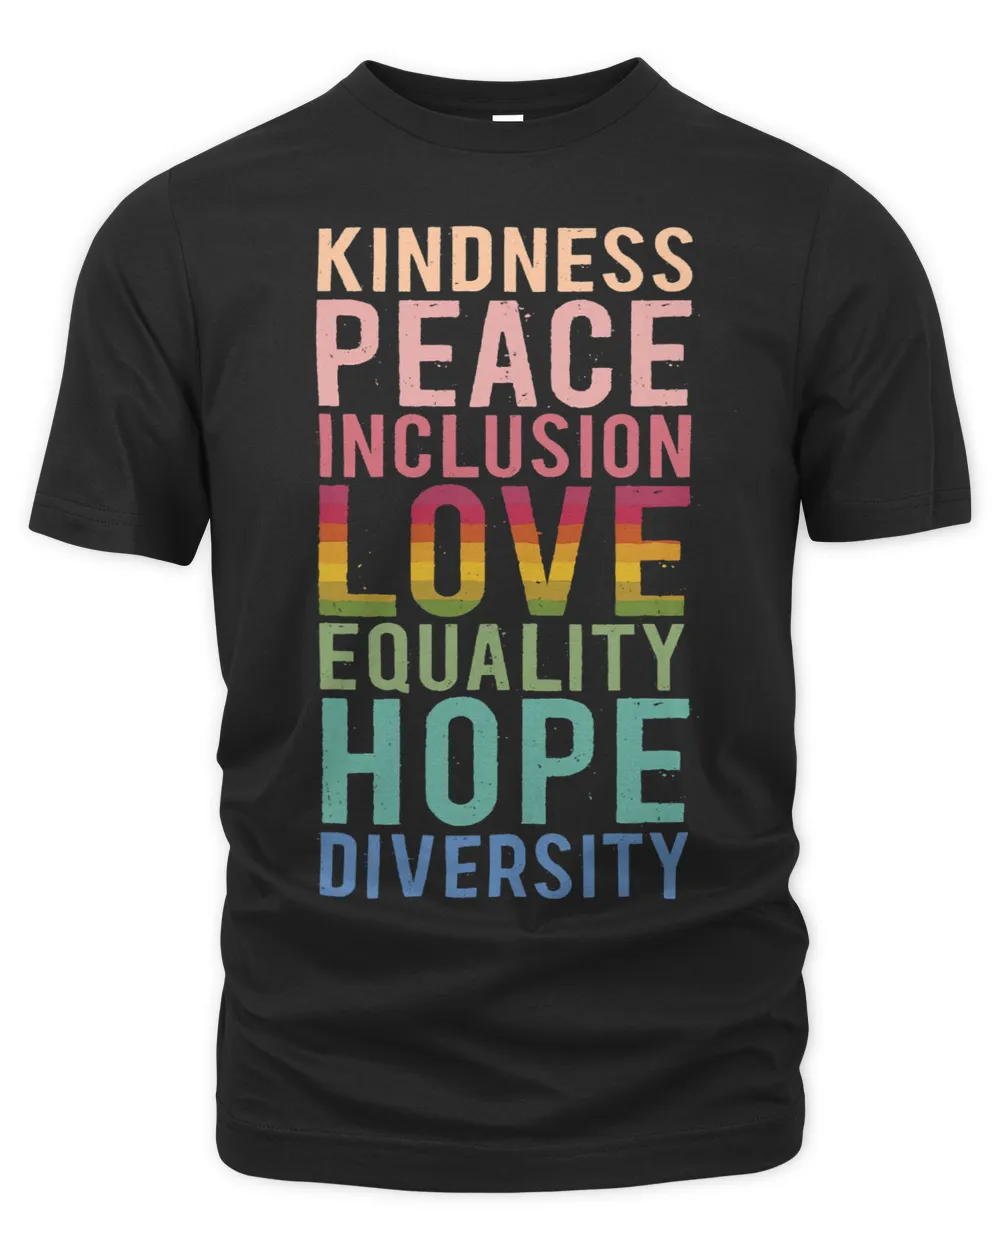 Spread Kindness Peace Love Hope Equality Diversity Inclusion